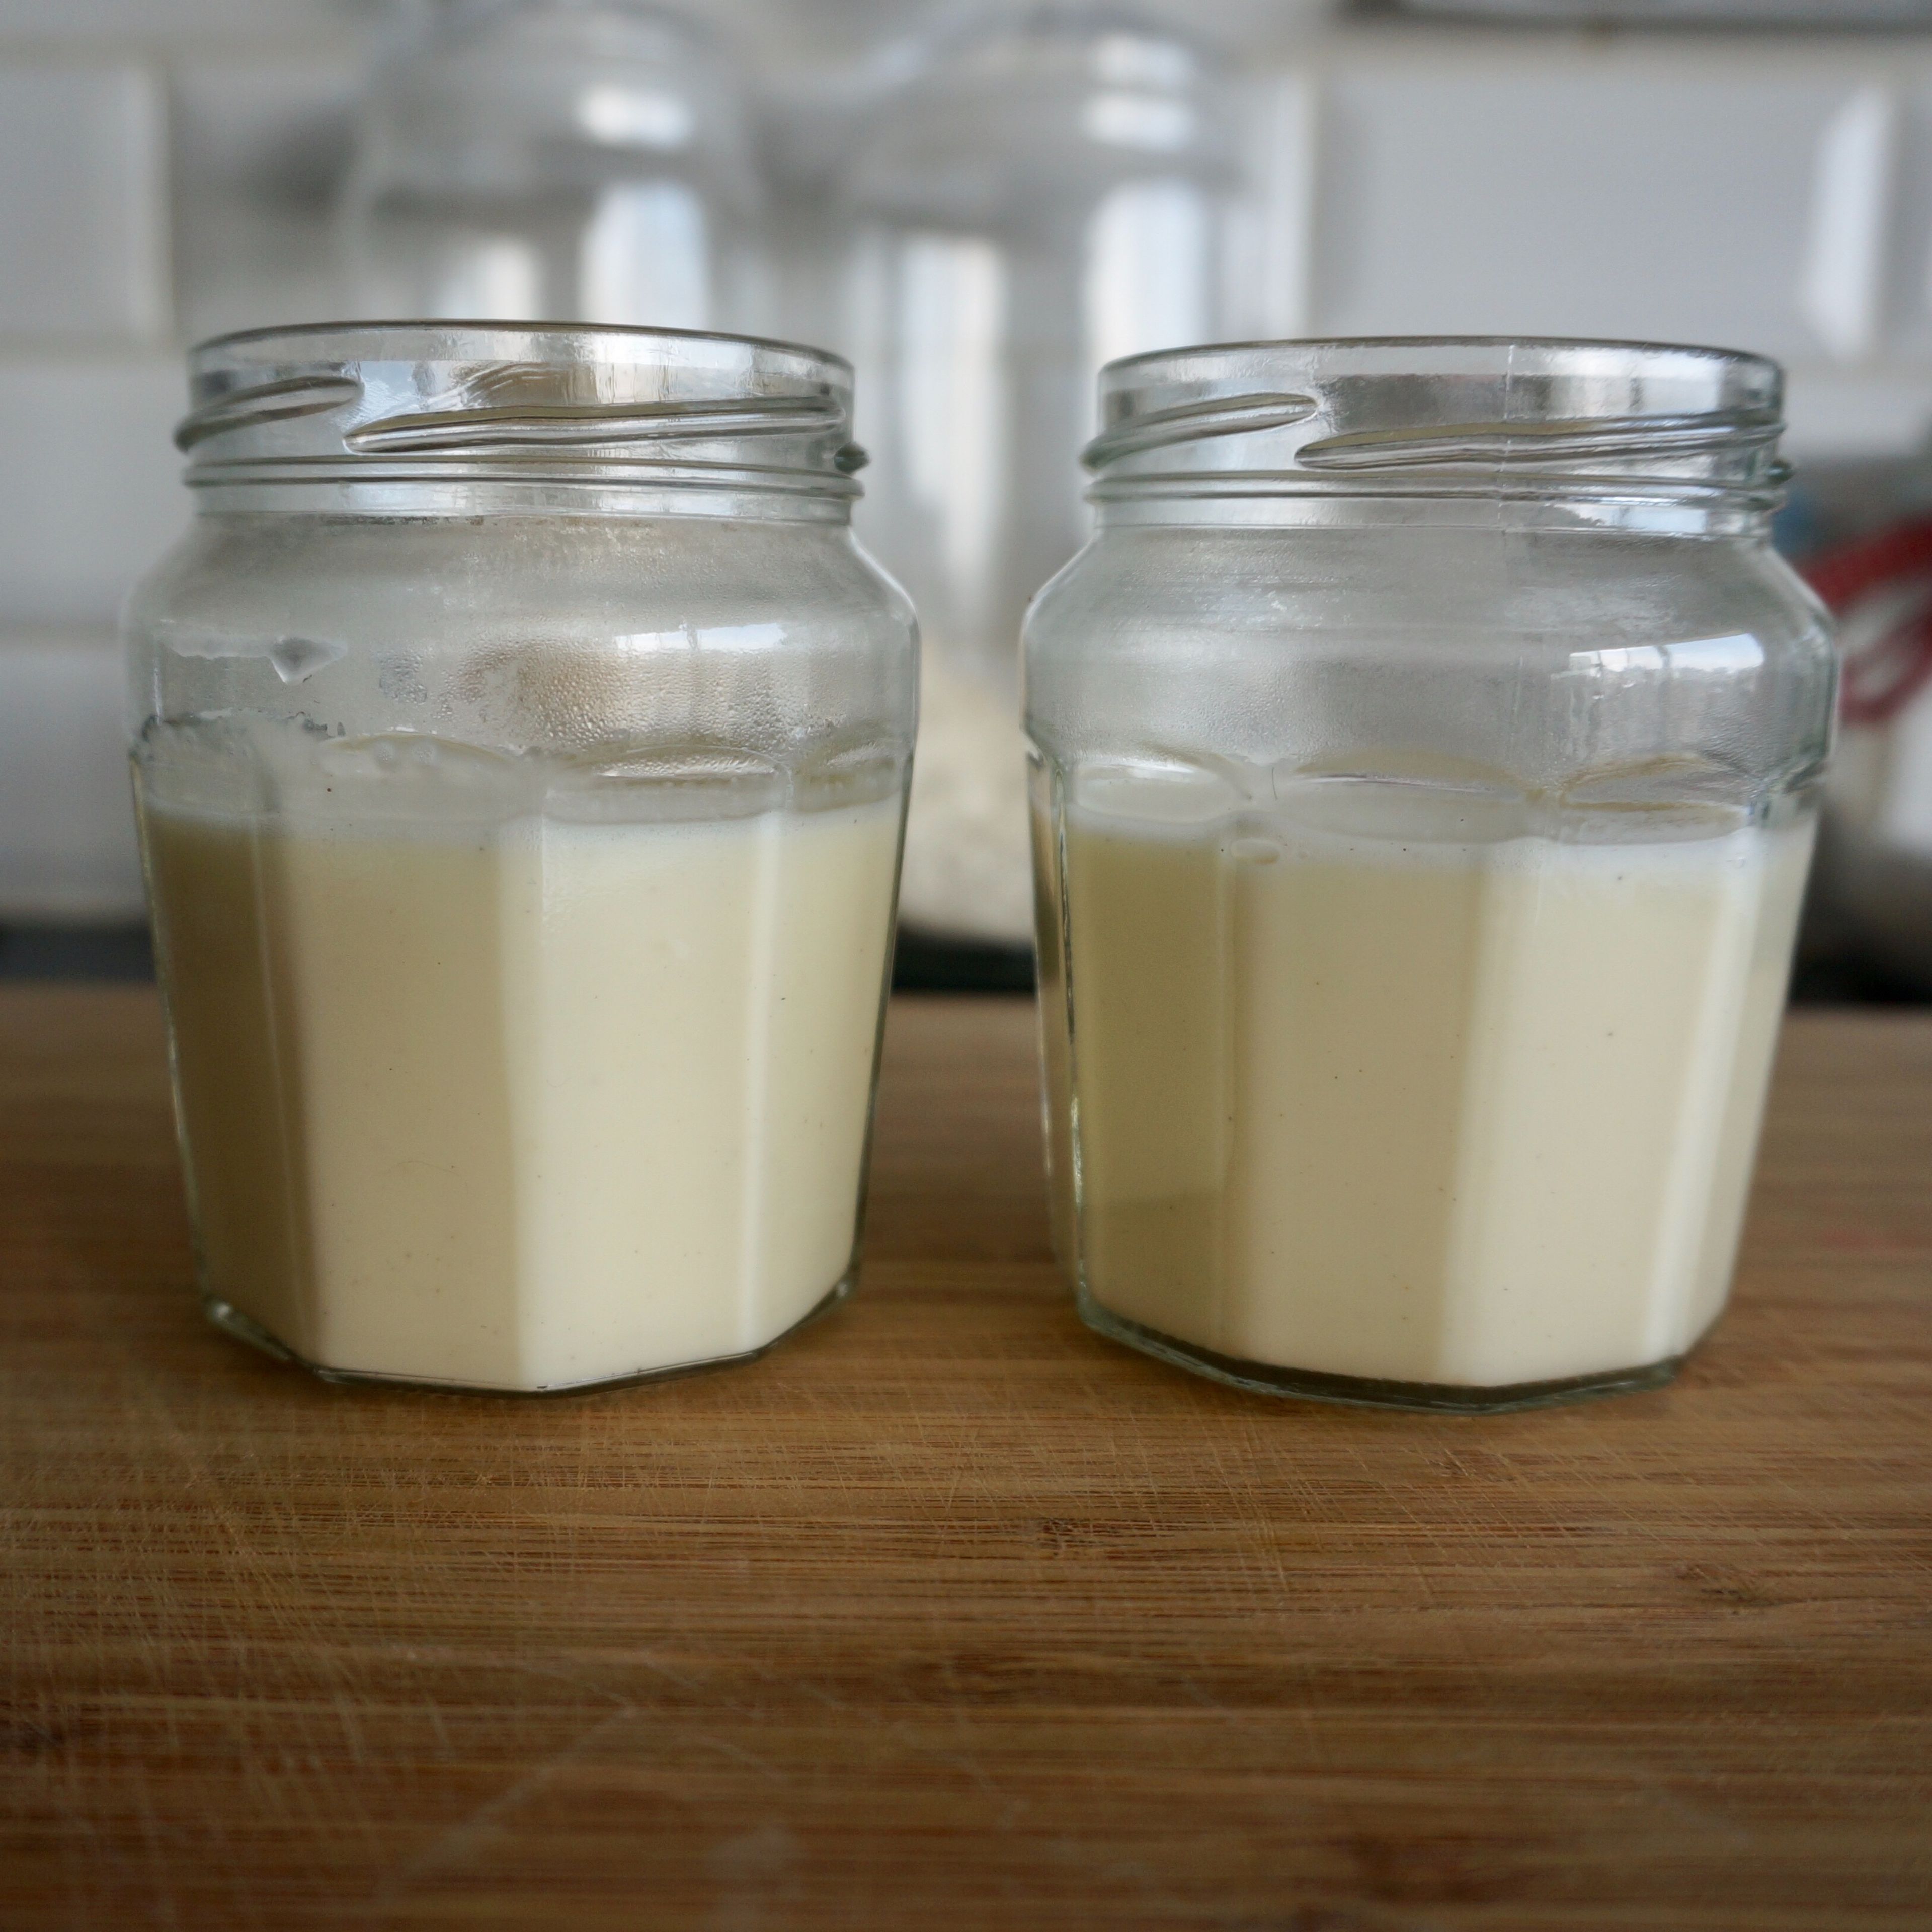 Pour cream into 2 individual serving dishes. Refrigerate for at least 3 hours, or until completely set.